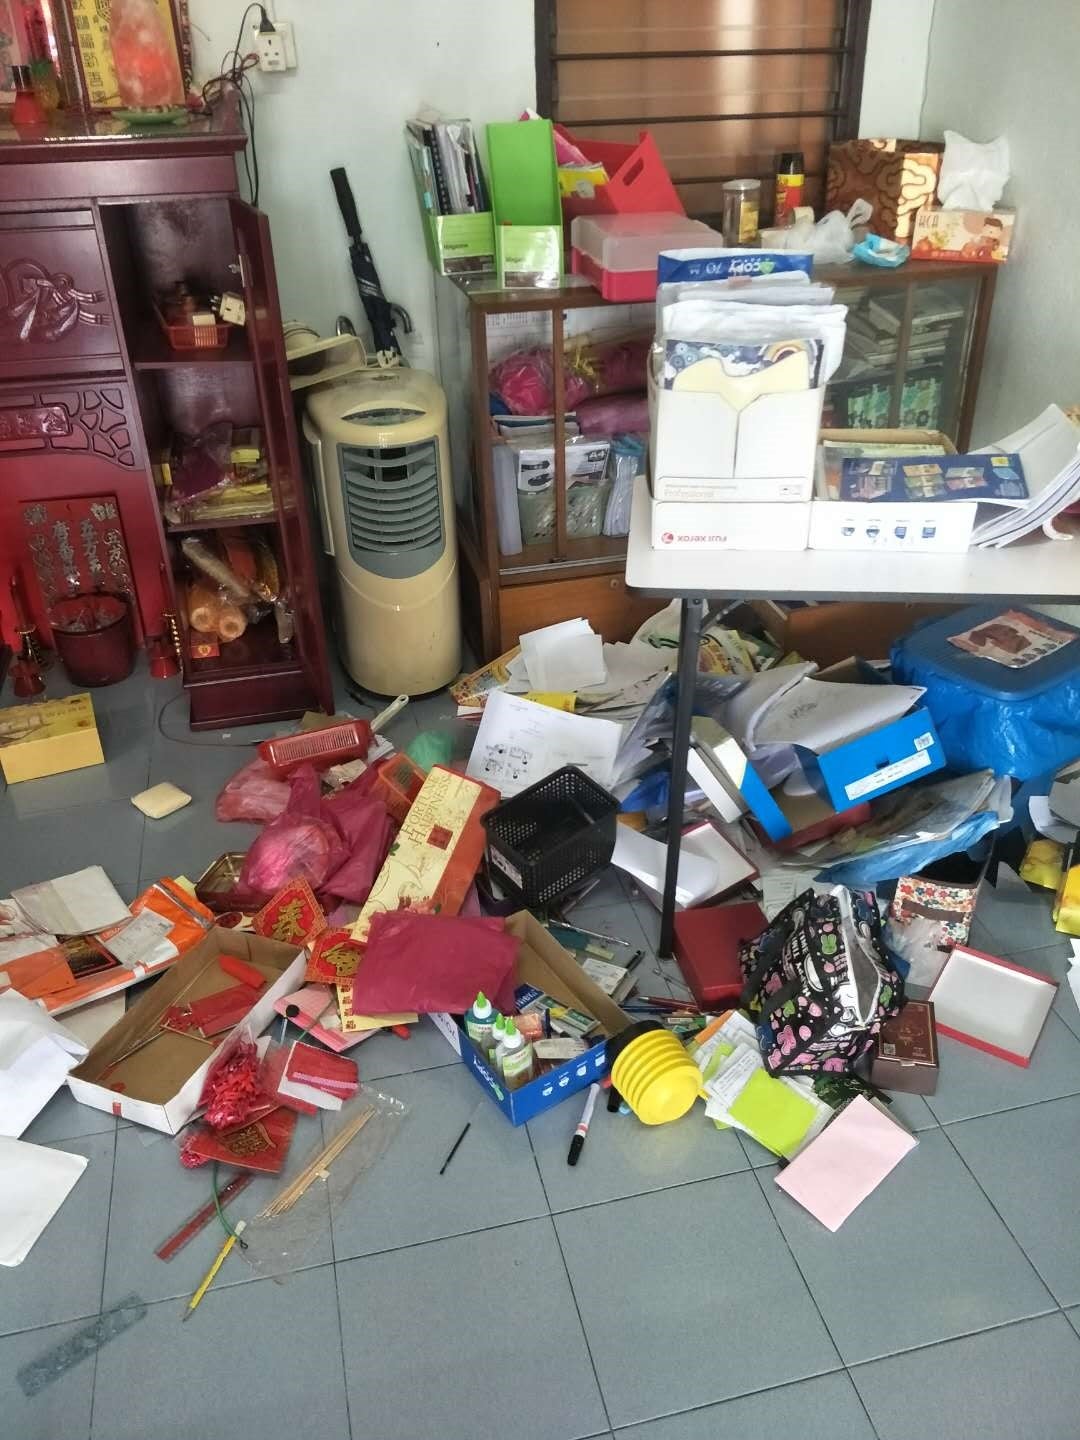 Burglars Break into Penang House, Leave With Nothing As They Can't Believe How Messy It Is - WORLD OF BUZZ